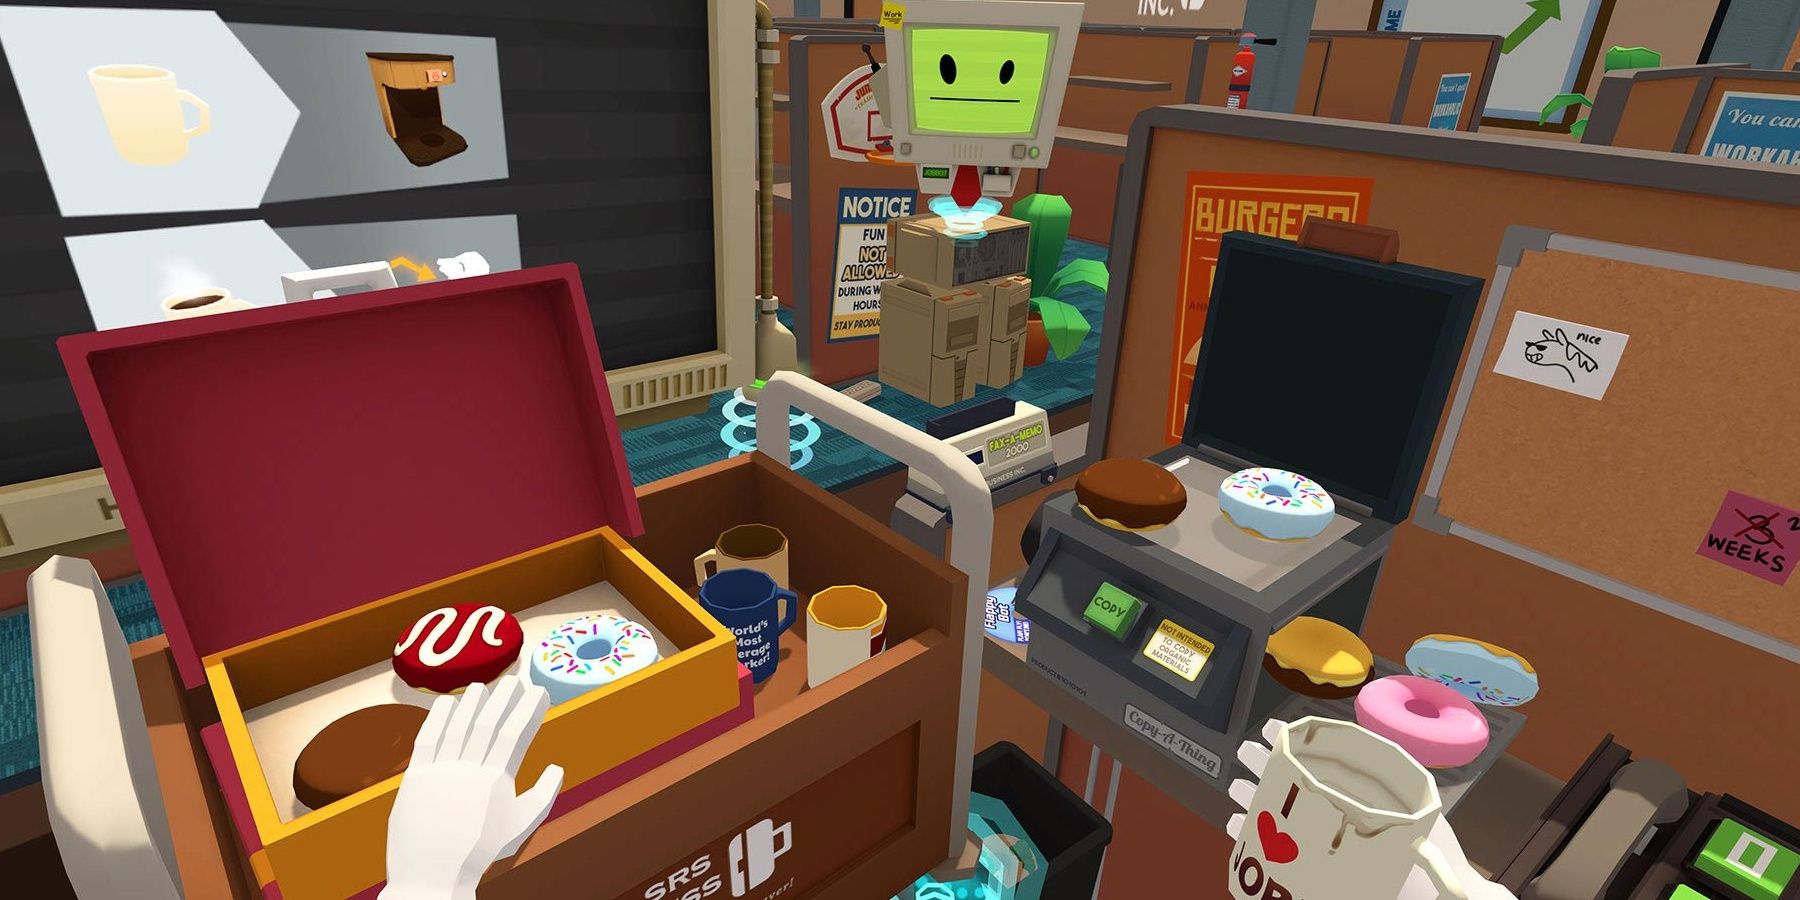 Hands are holding a coffee mug near doughnuts in a simulated office with a computer with a face in the background